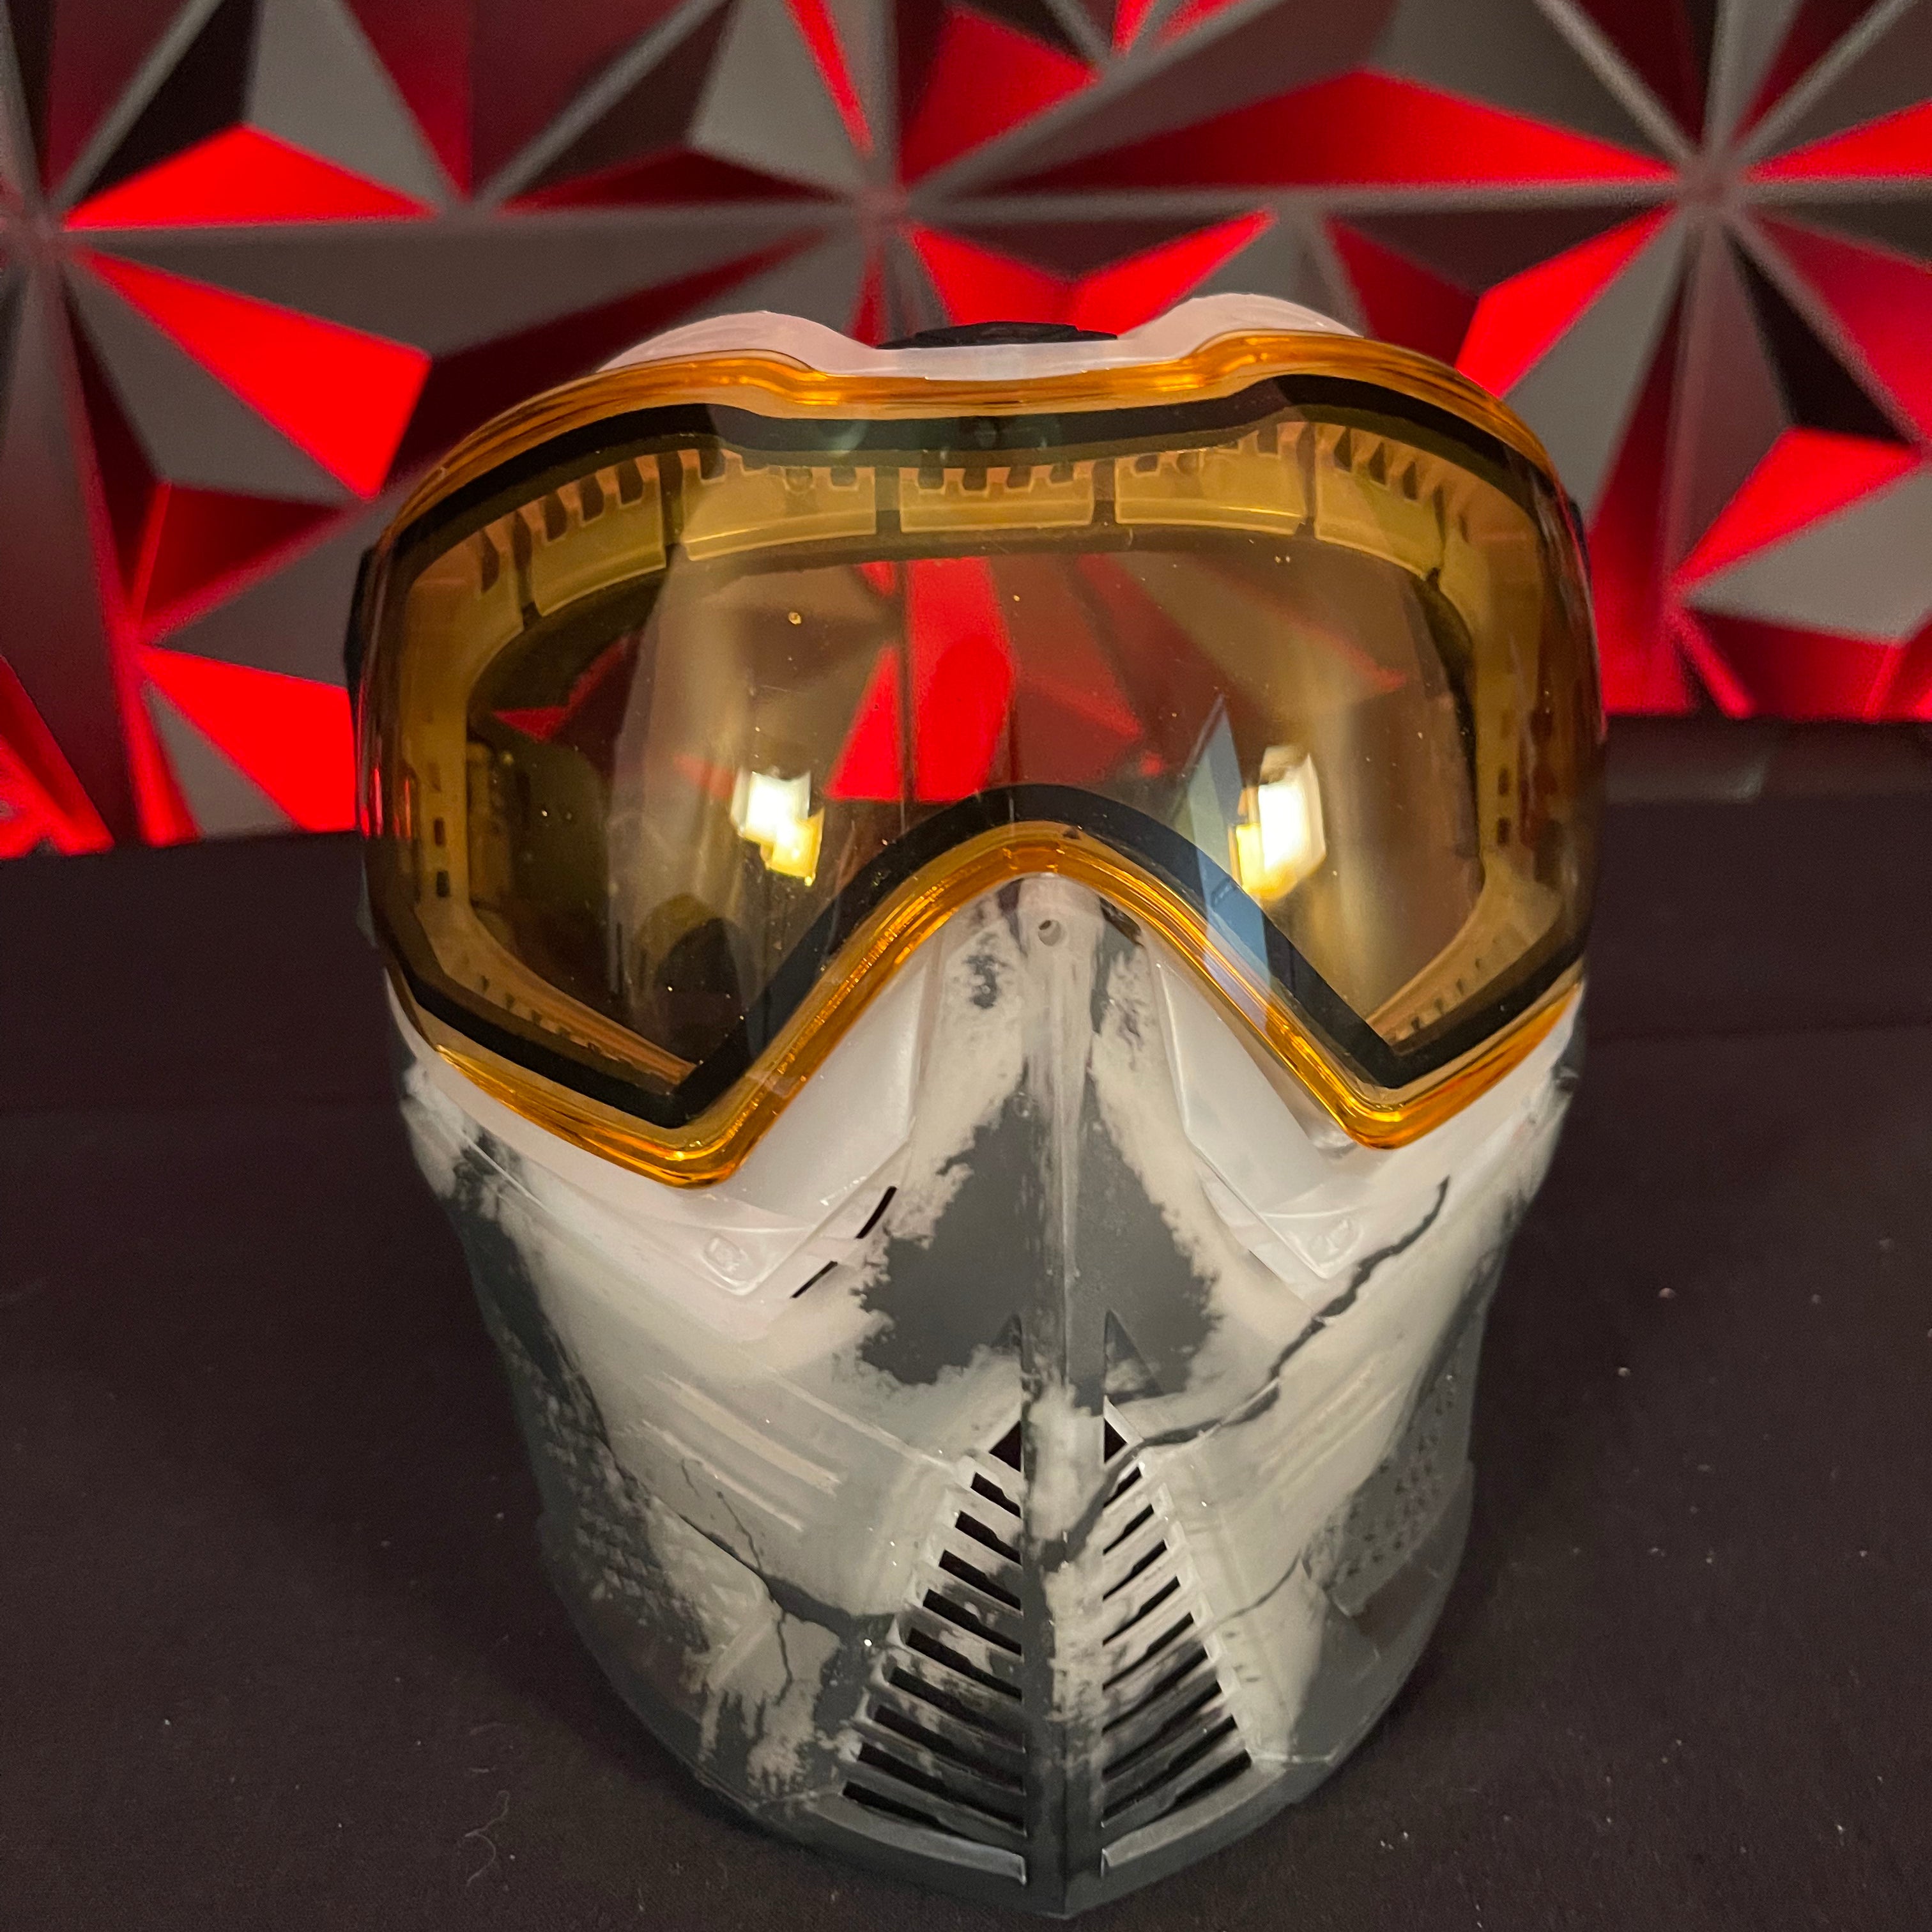 Used Push Unite Paintball Mask - LE Infamous Ghost Skull